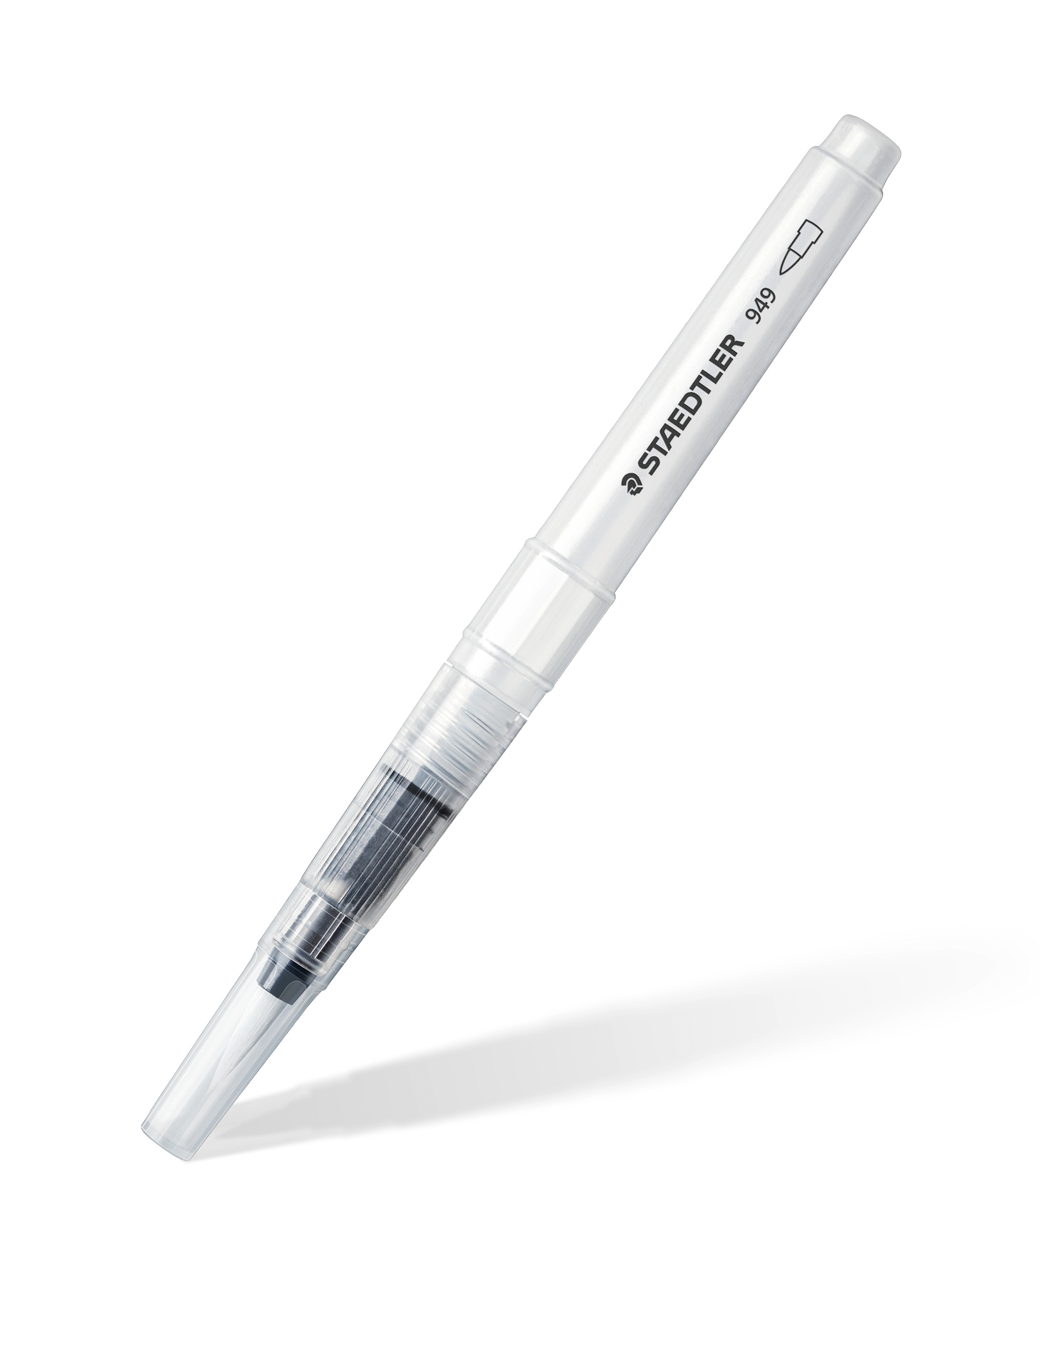 Water brush for aquarelle, staedtler 949, side view closed